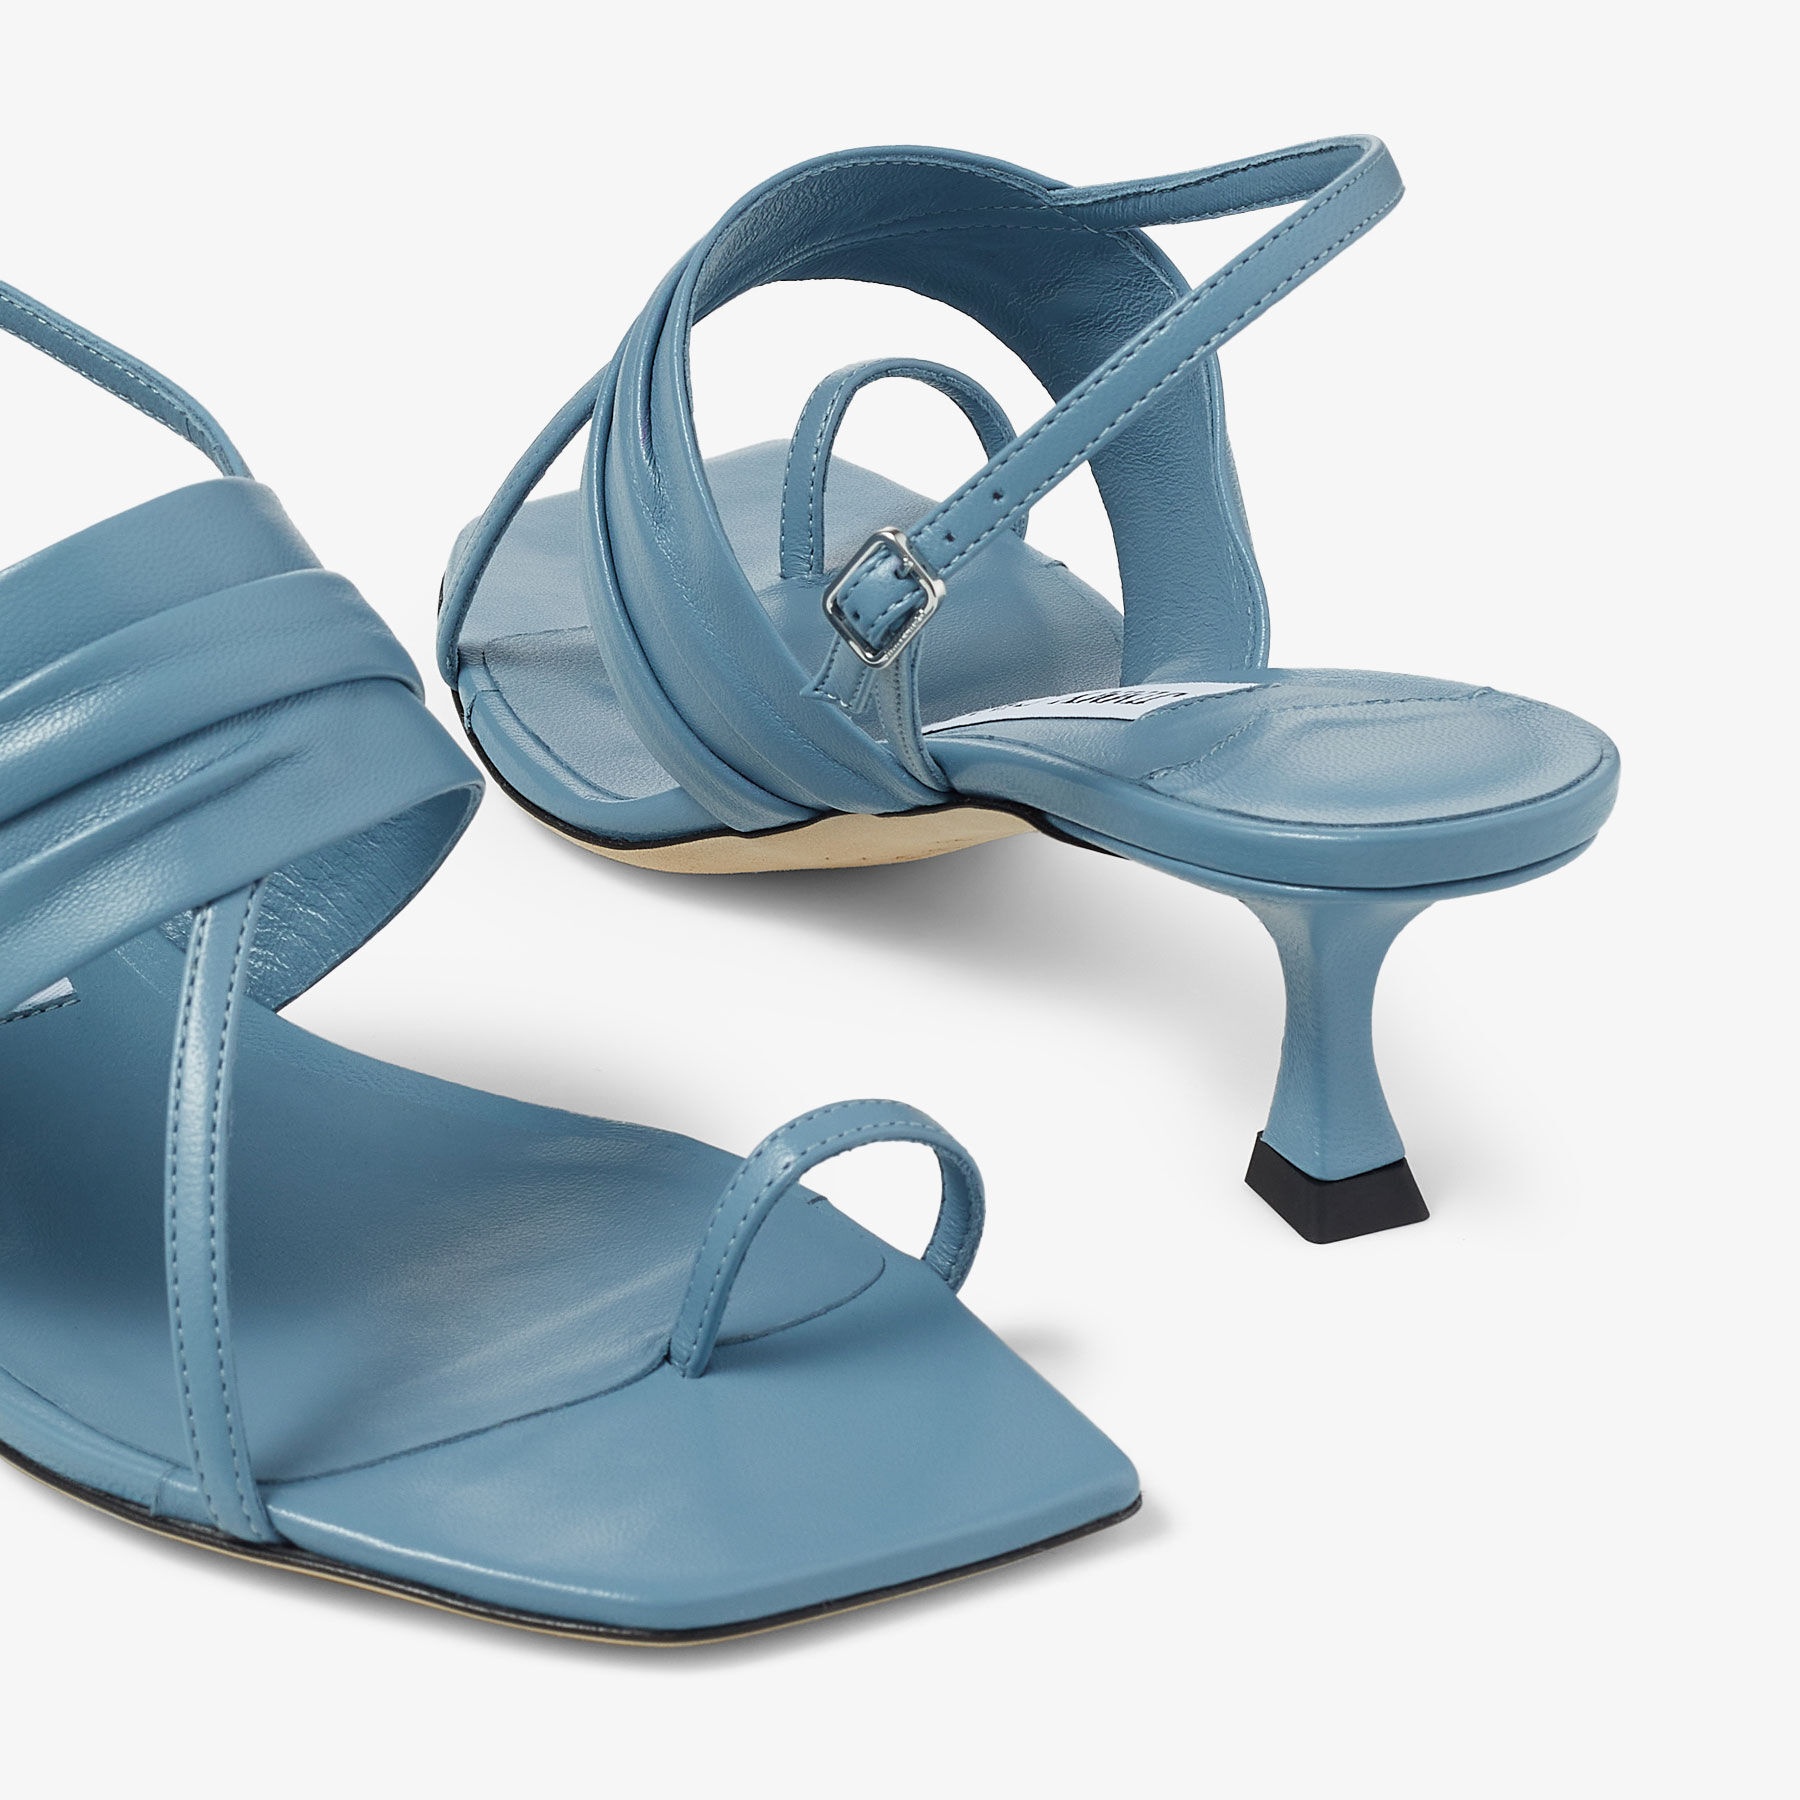 Beziers 50
Smoky Blue Nappa Leather Sandals - 4